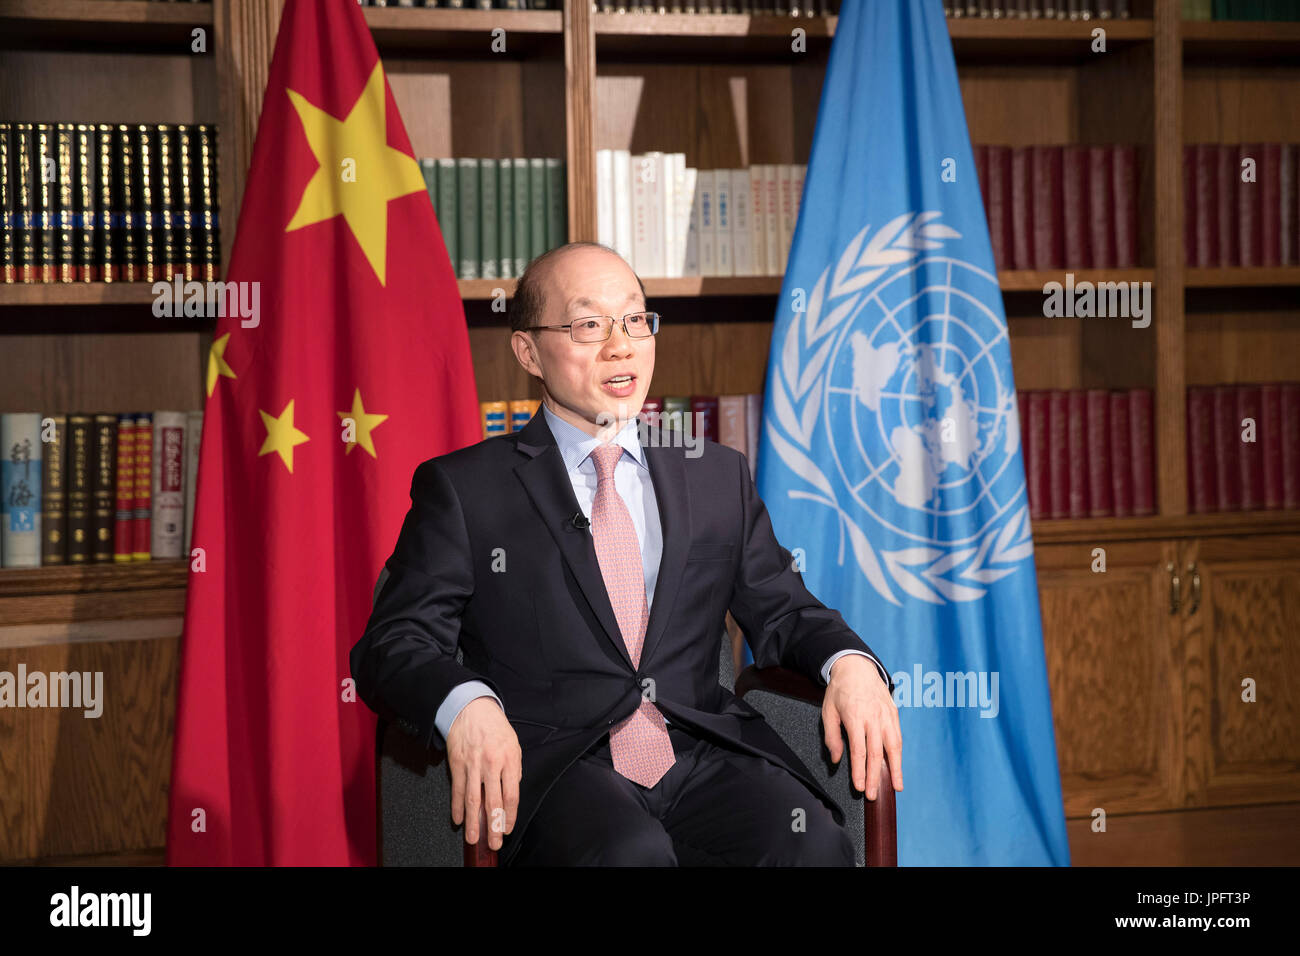 United Nations, New York, USA. 1st August, 2017. Liu Jieyi, China's Permanent Representative to the United Nations, receives an interview with Xinhua in New York, on Aug. 1, 2017. China on July 31 concluded its rotating presidency of the UN Security Council for the month of July. Under the month-long Chinese presidency, the Security Council, which is the most powerful UN body, convened more than 30 meetings, adopted four resolutions and four presidential statements, and issued seven press statements. Stock Photo